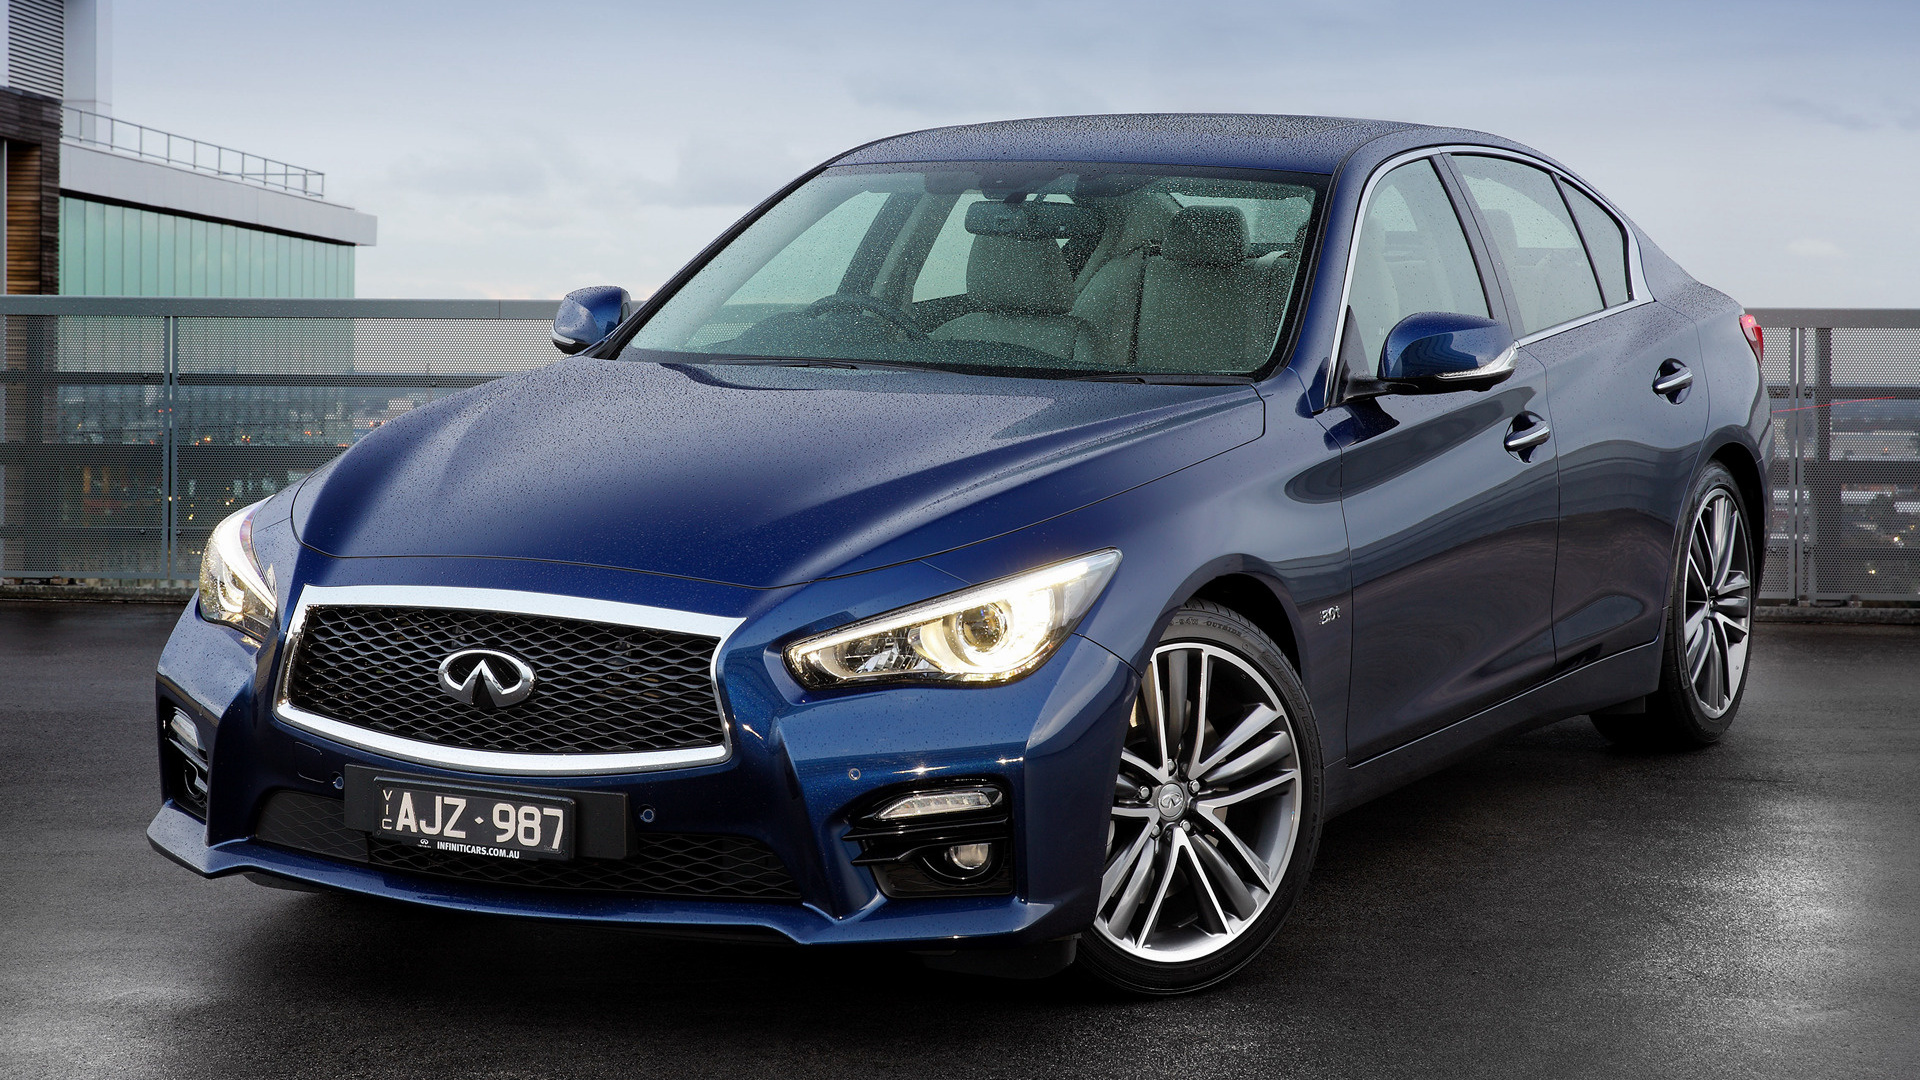 2014 Infiniti Q50 Sport (AU) - Wallpapers and HD Images | Car Pixel